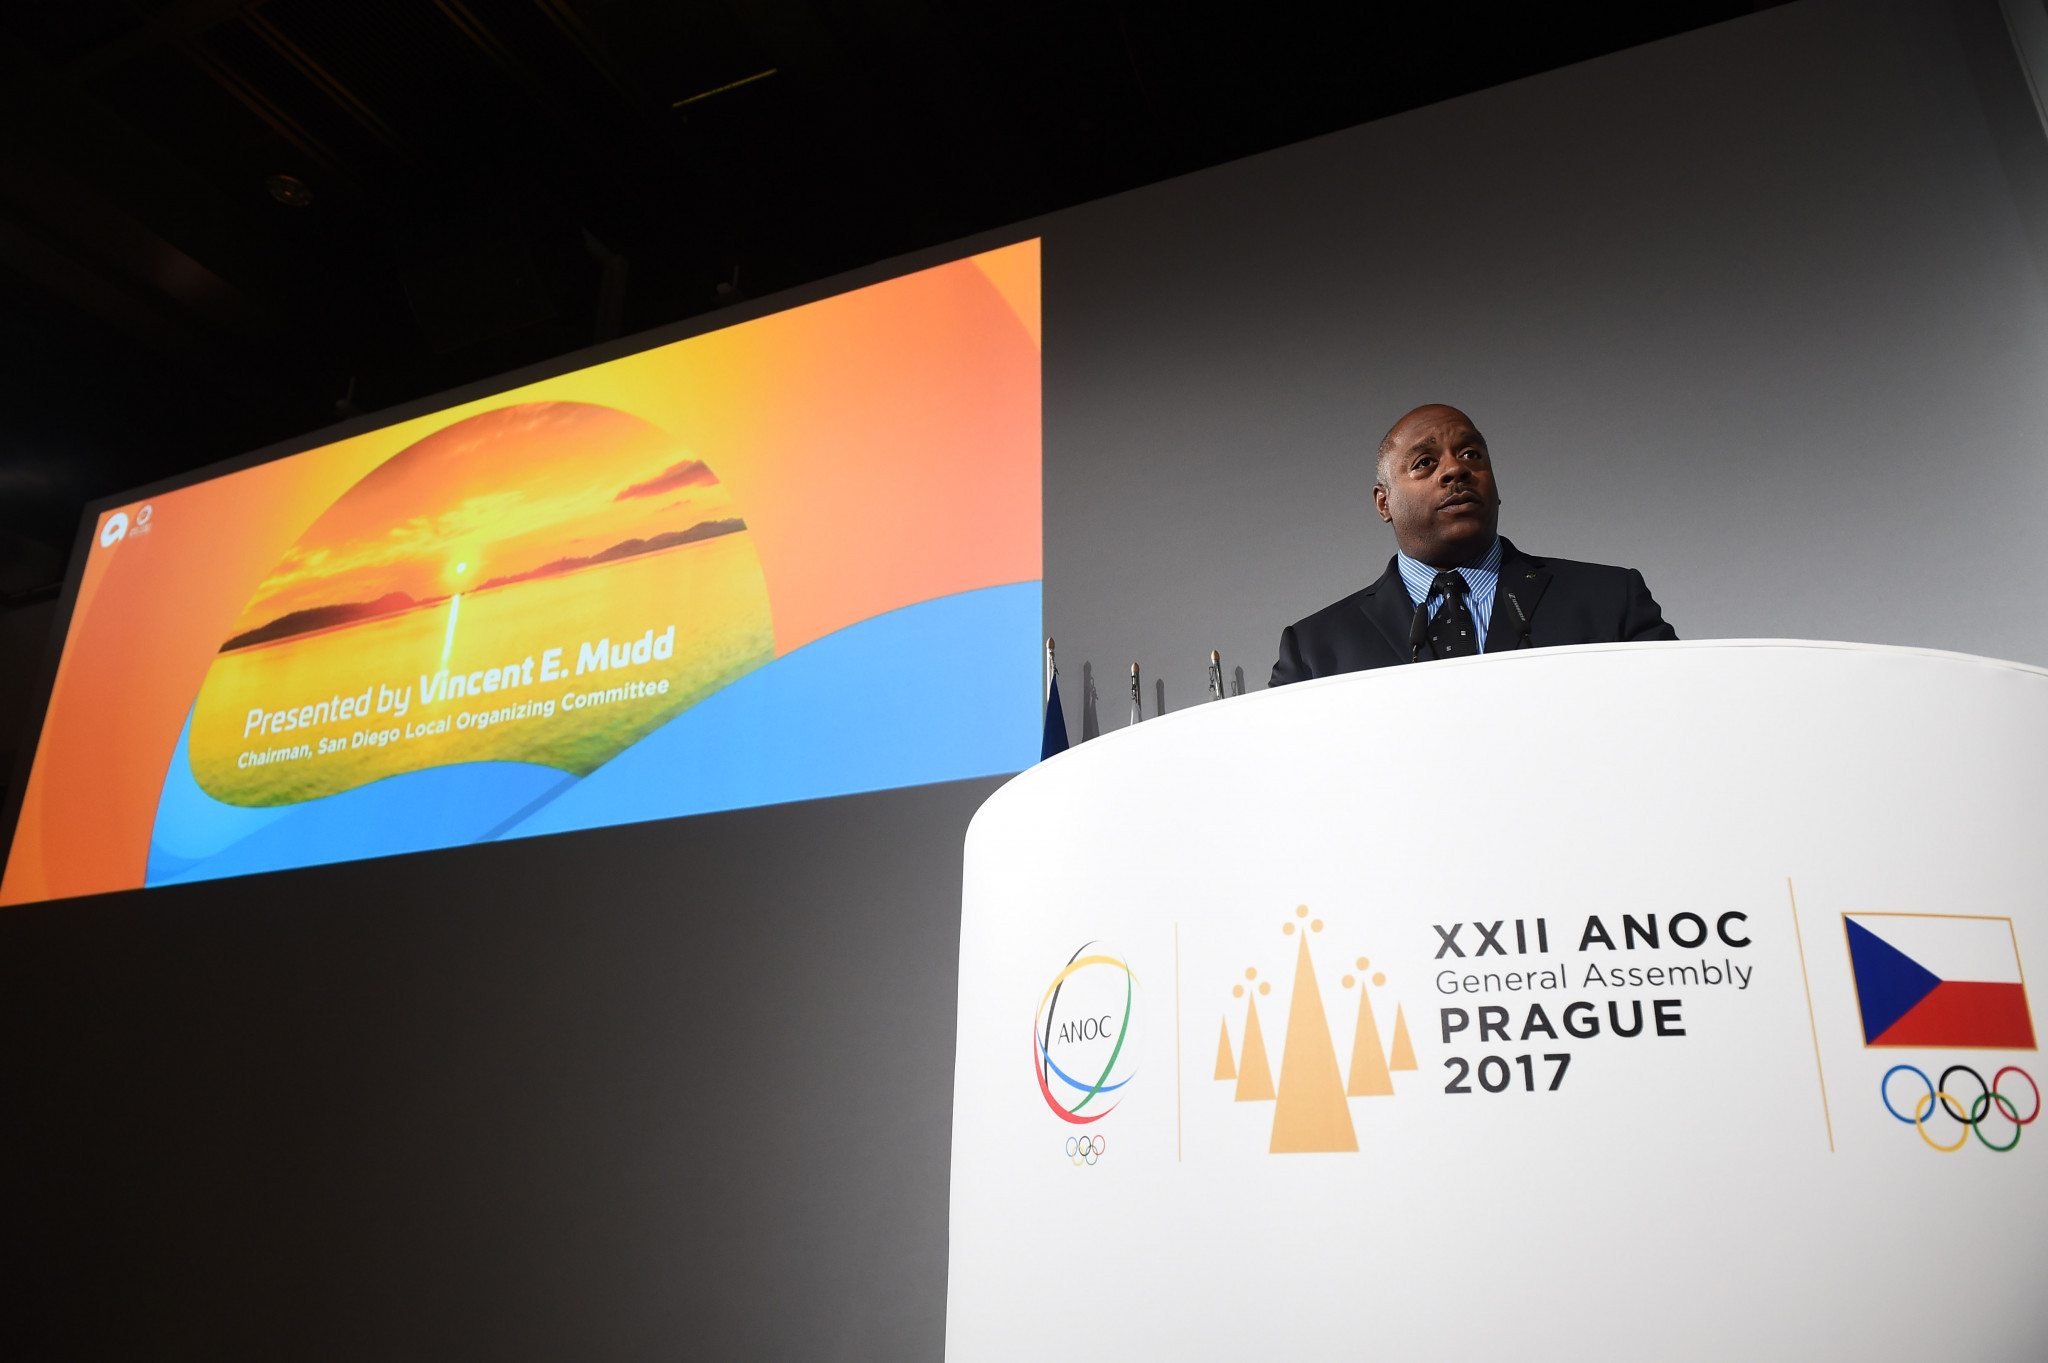 San Diego 2019 chairman Vincent Mudd presented the concept in Prague last week ©Getty Images